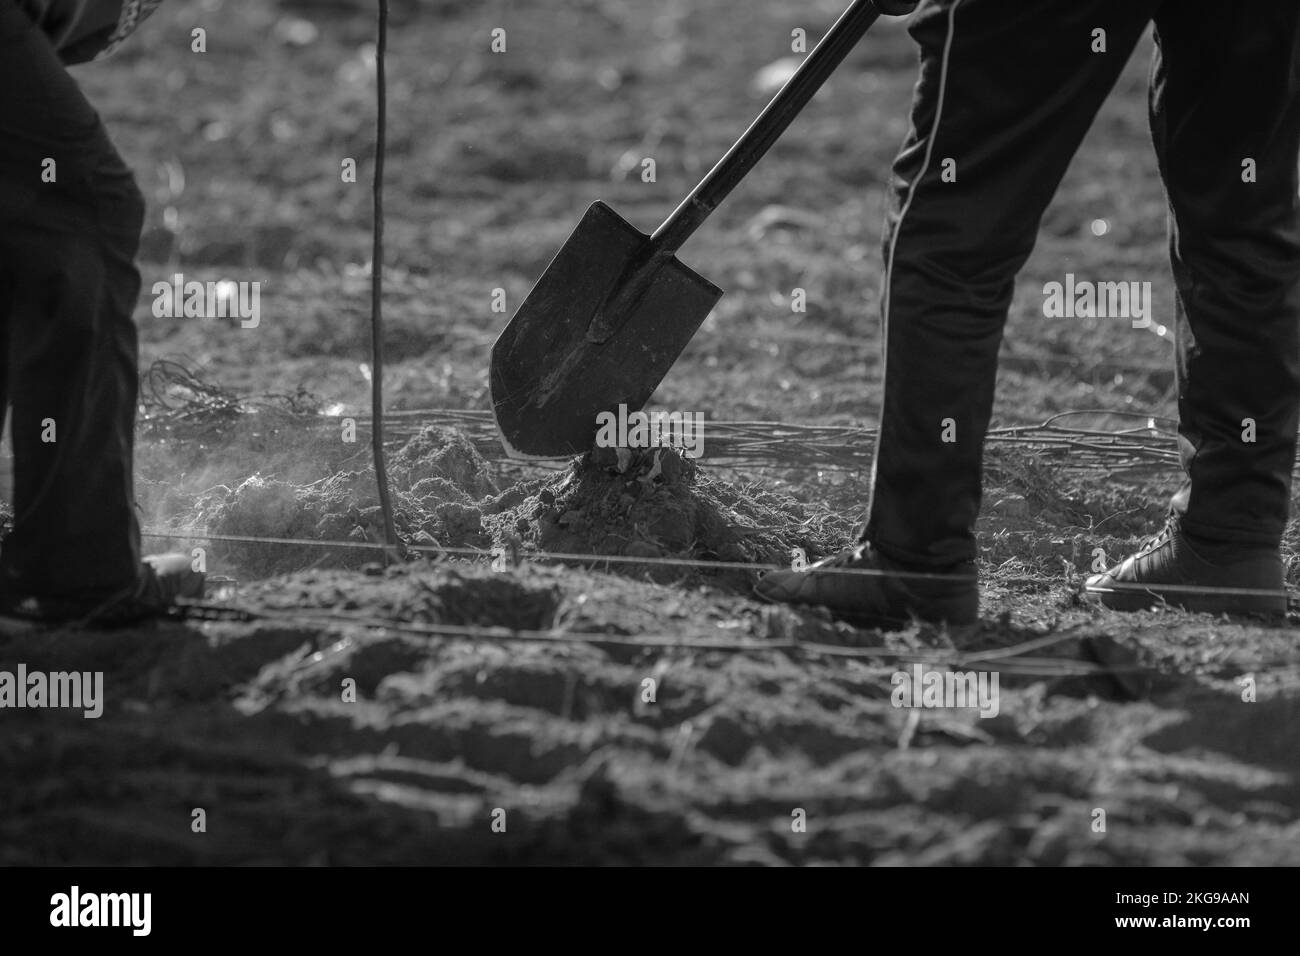 Details with a person shovelling dry, arid and dusty soil during a planting activity. Stock Photo